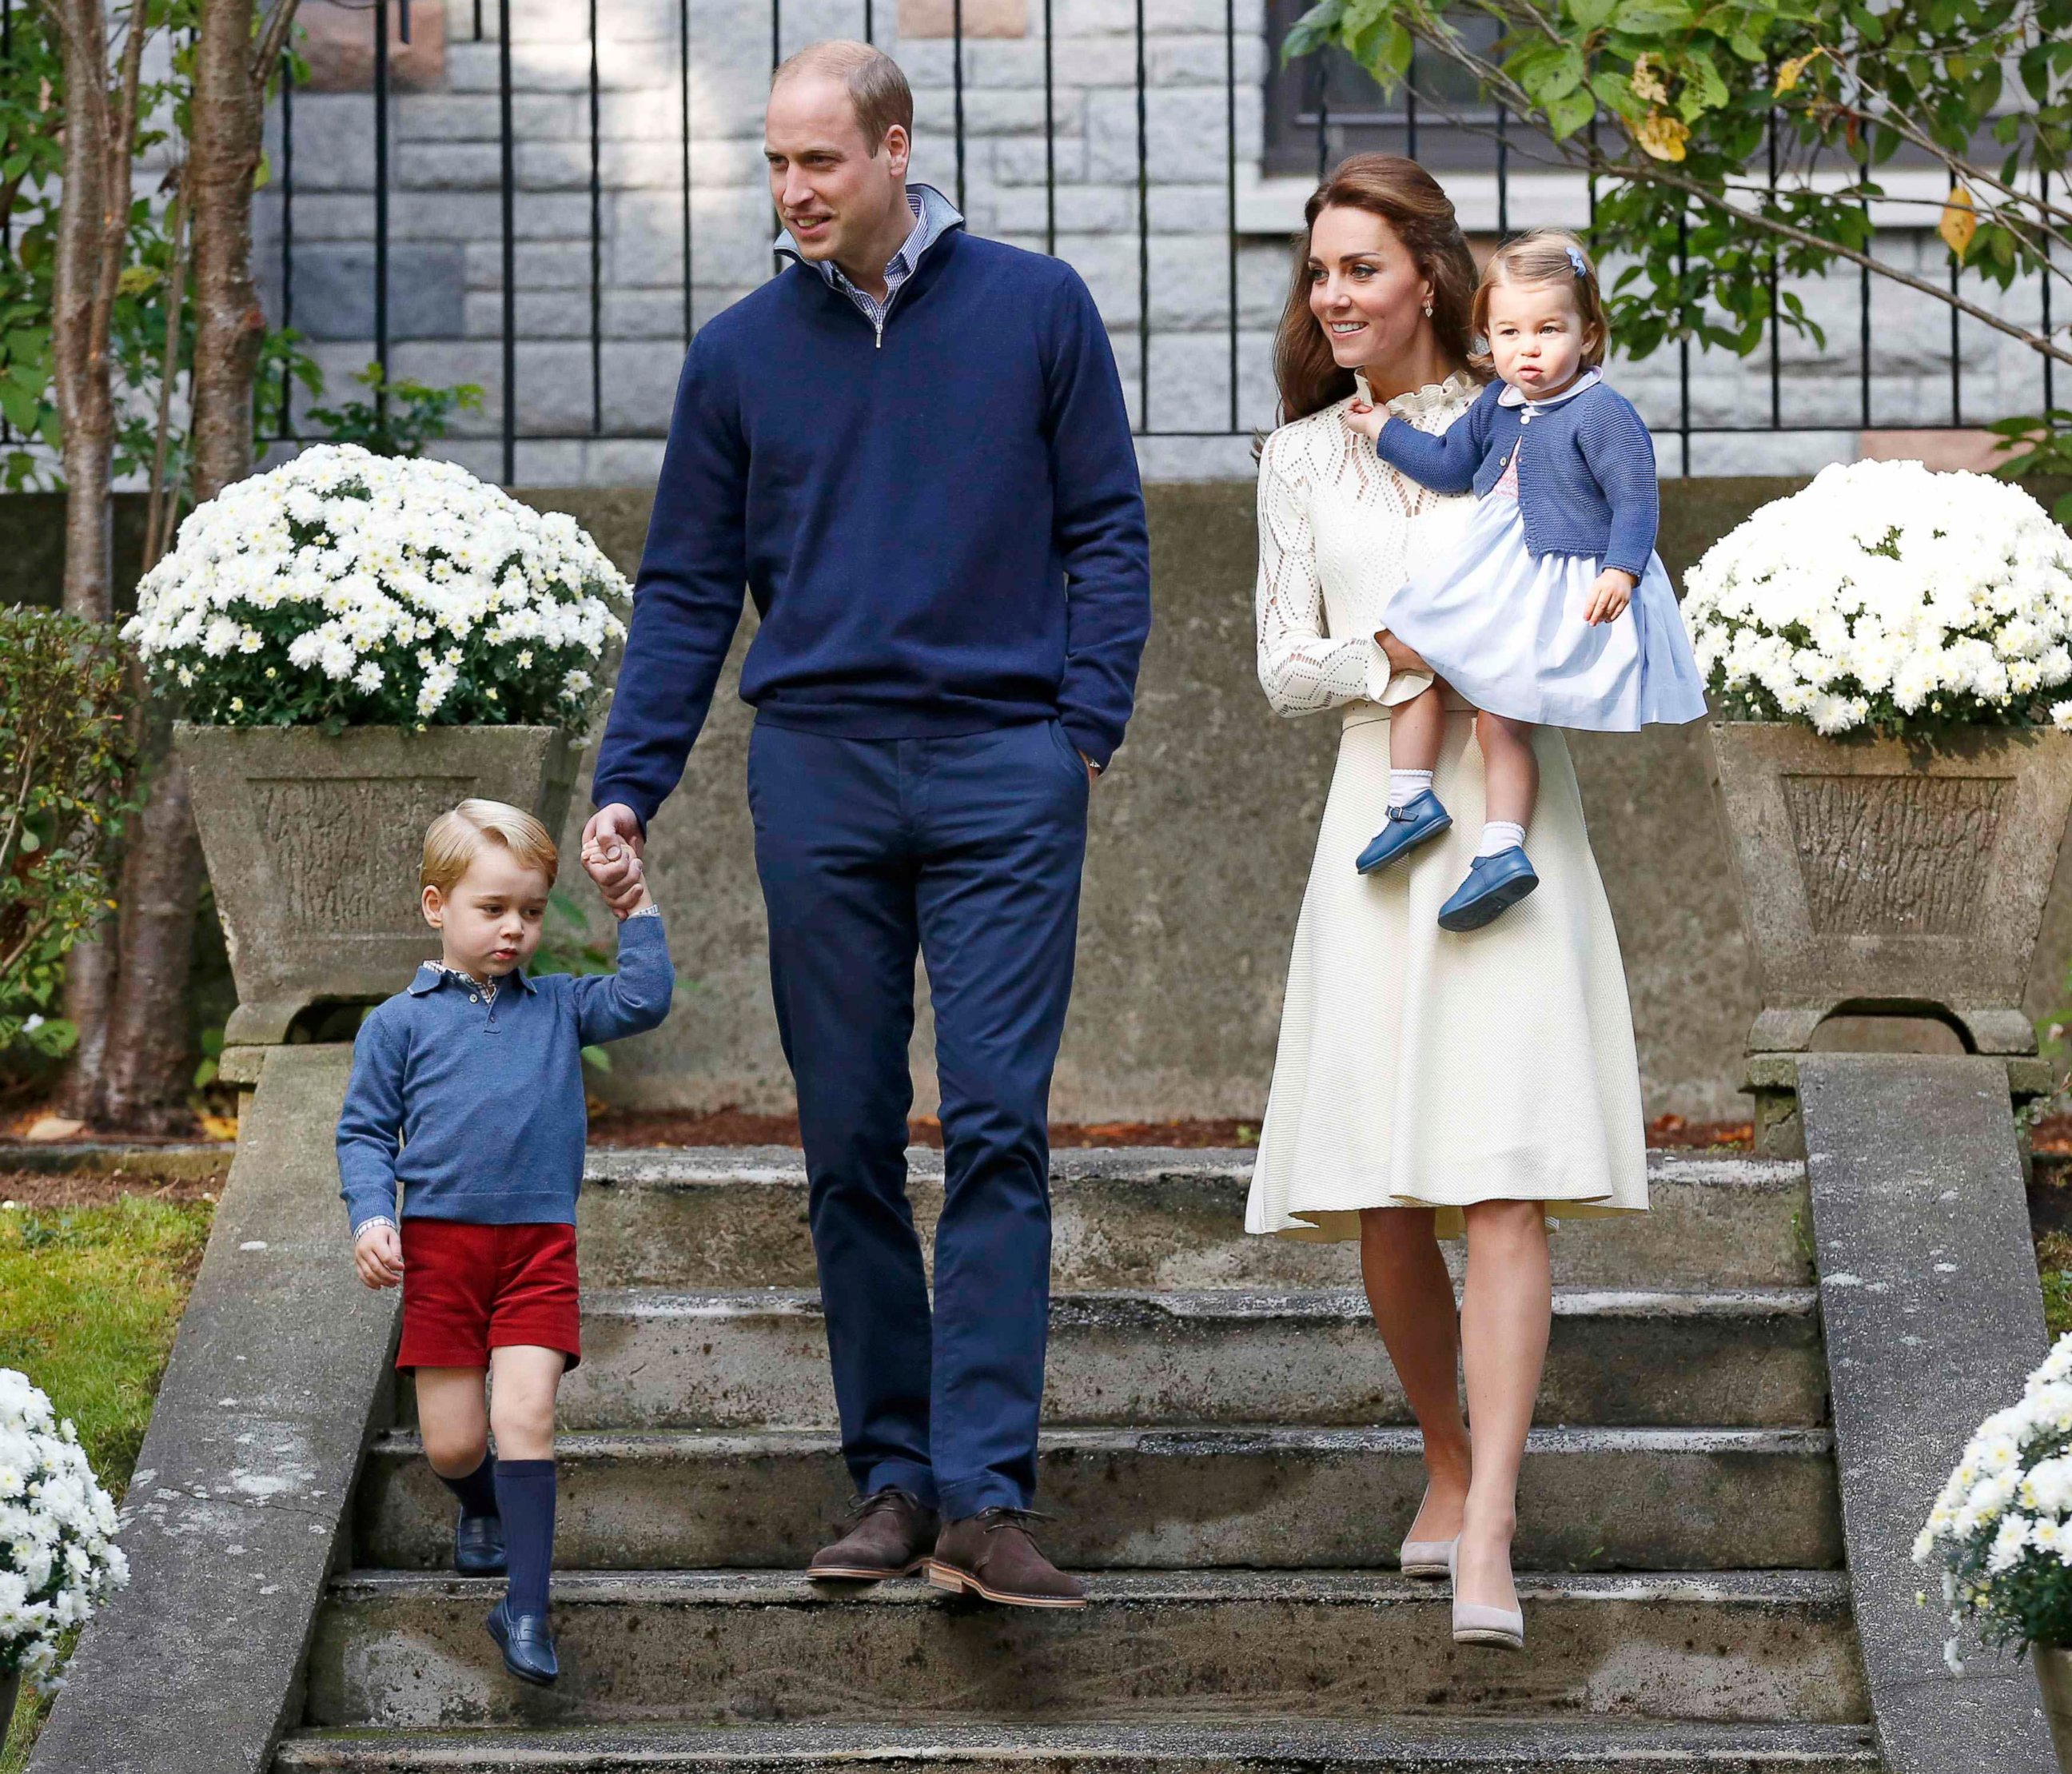 PHOTO: Prince William (2nd L), Catherine, Duchess of Cambridge, Prince George (L) and Princess Charlotte (R) arrive at a children's party at Government House in Victoria, British Columbia, Canada, Sept,29, 2016.  